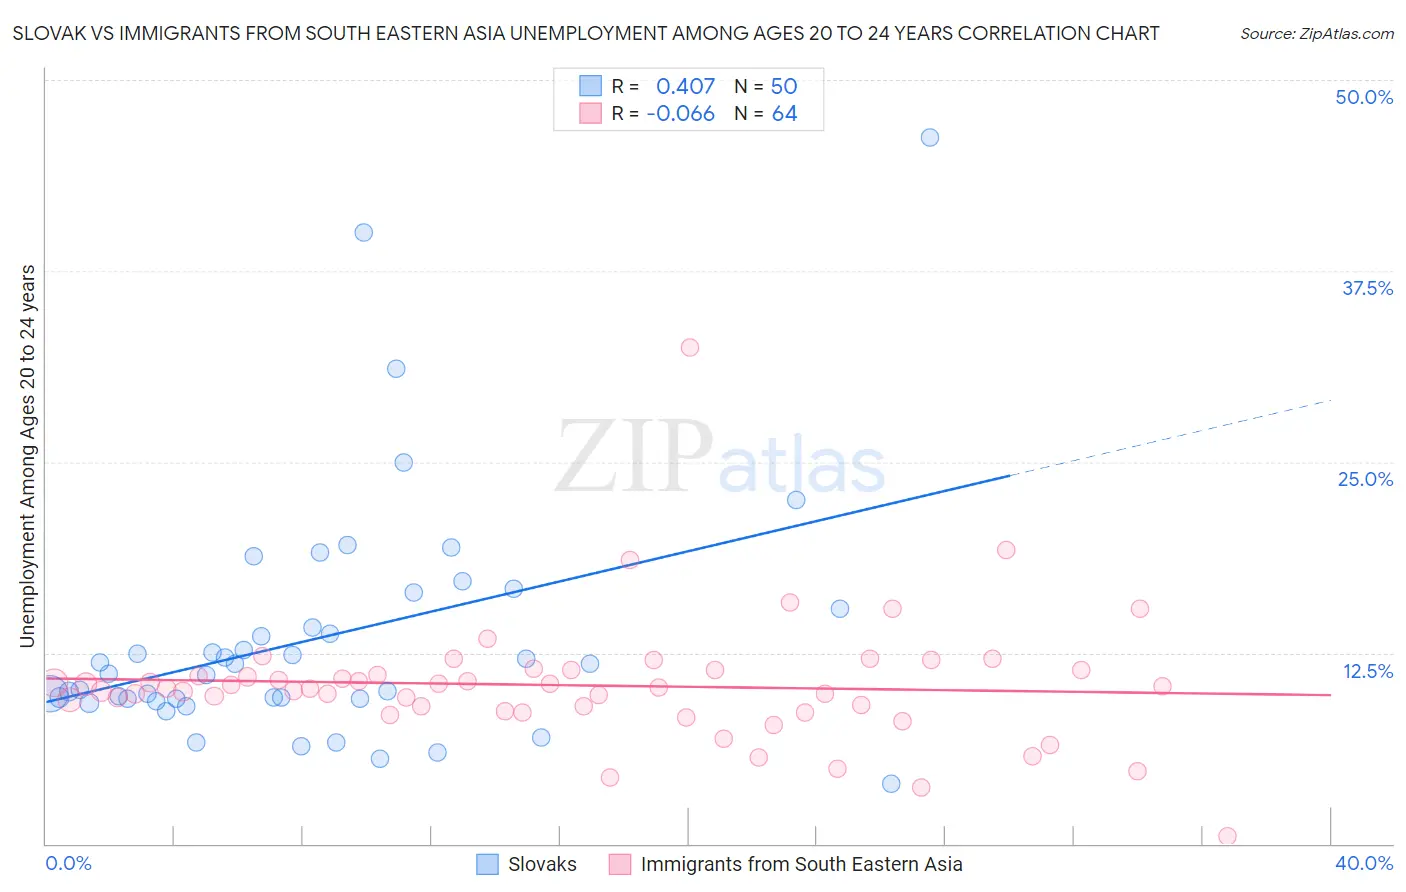 Slovak vs Immigrants from South Eastern Asia Unemployment Among Ages 20 to 24 years